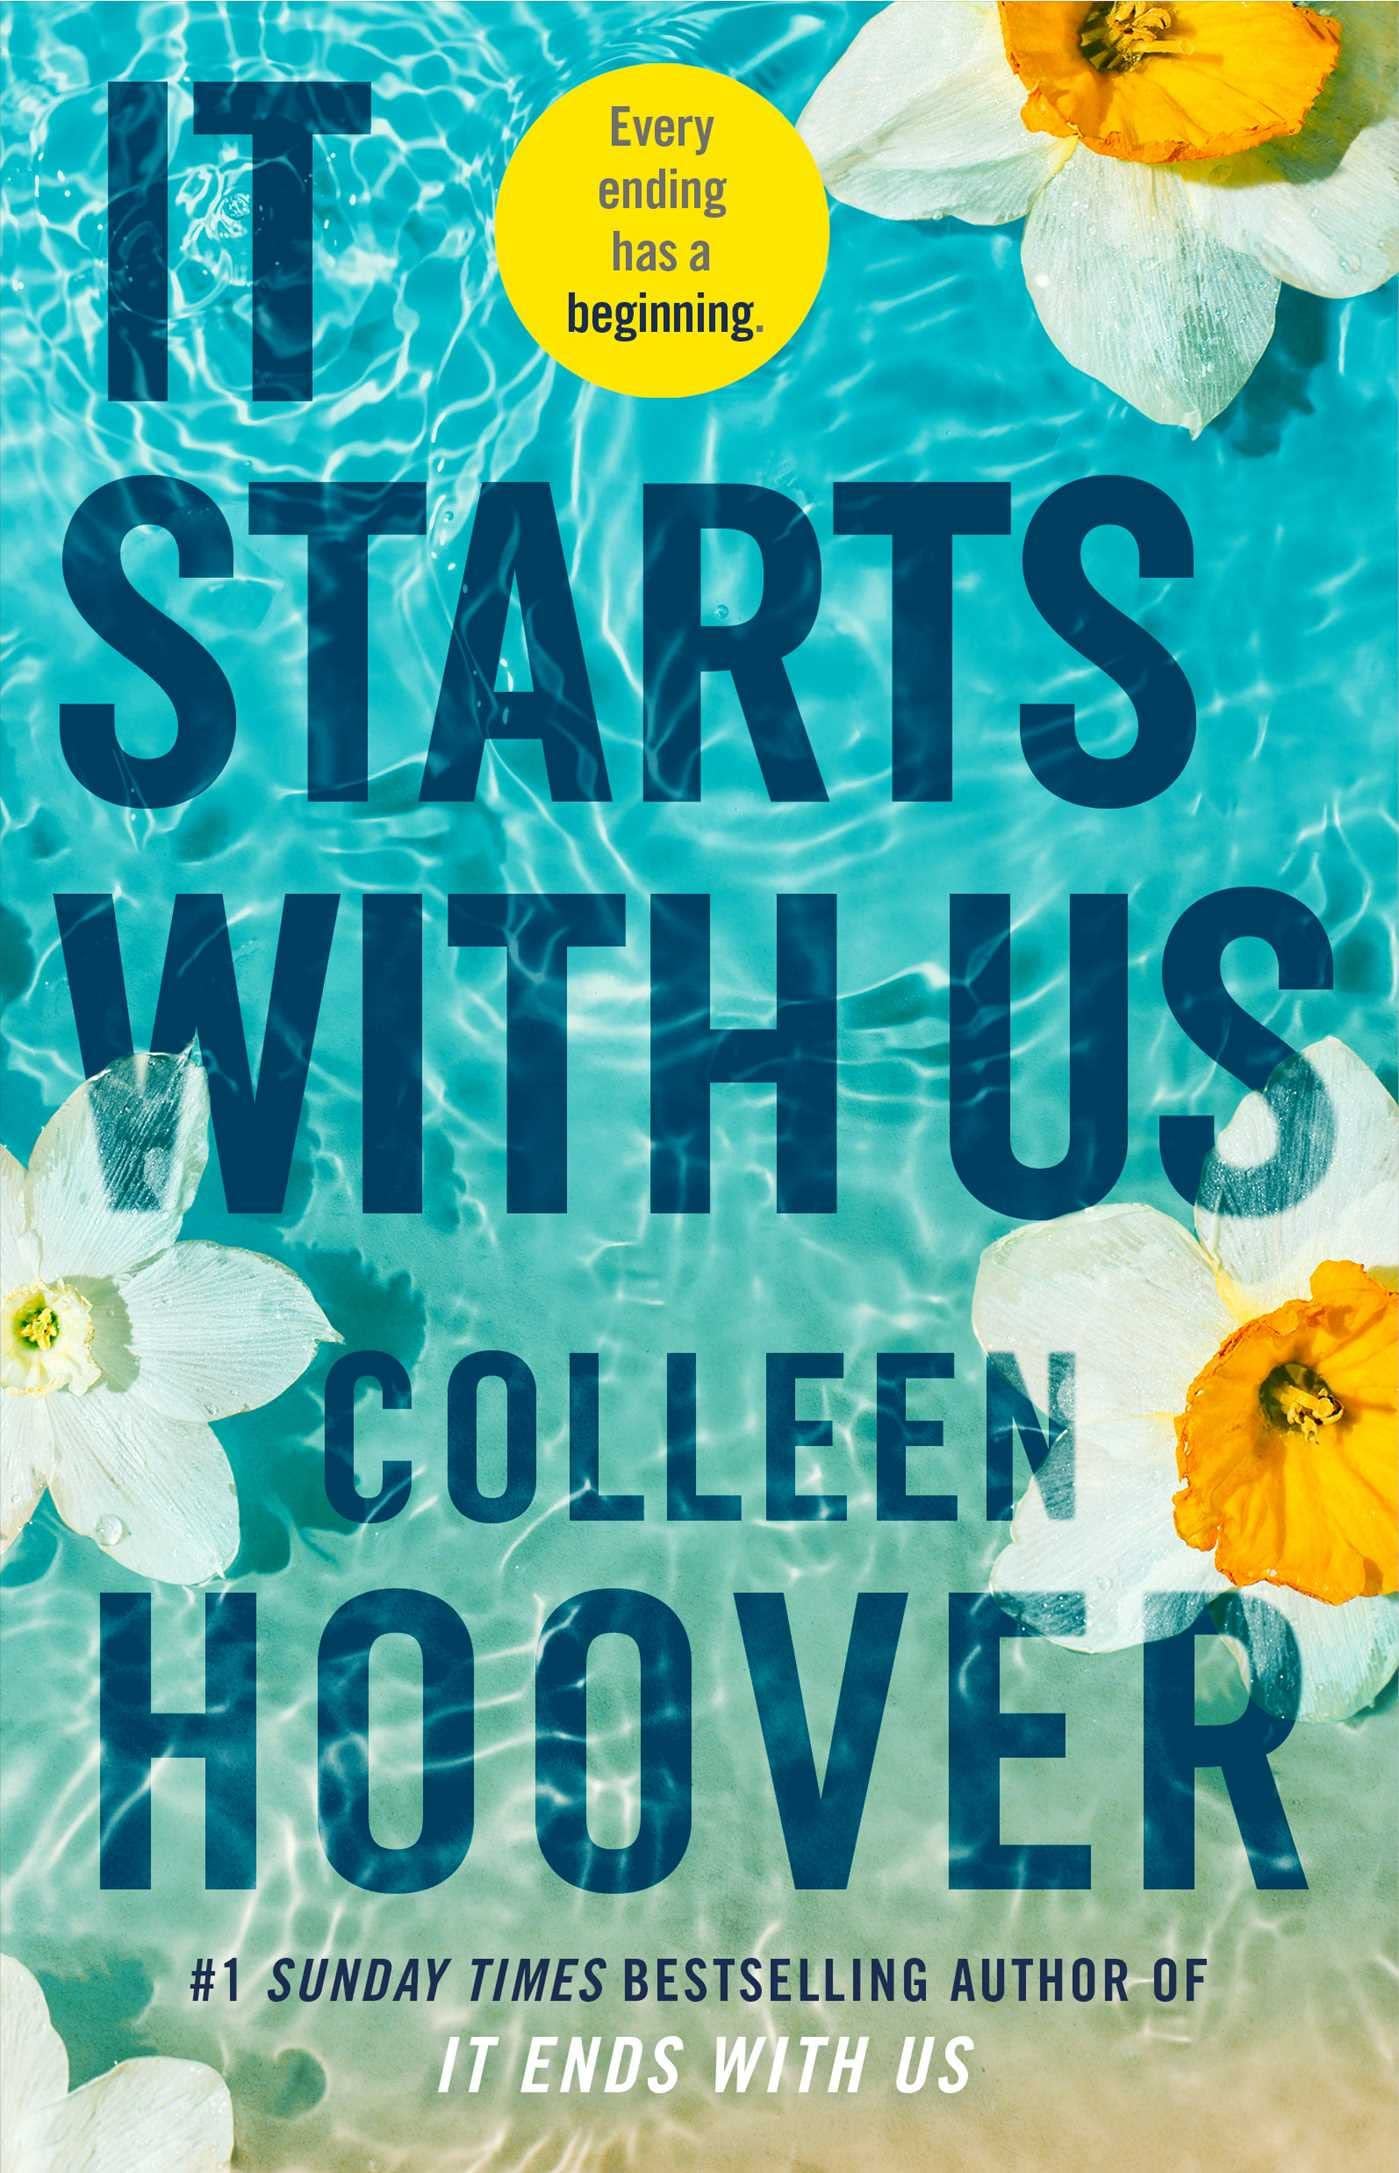 Colleen Hoover's books in order